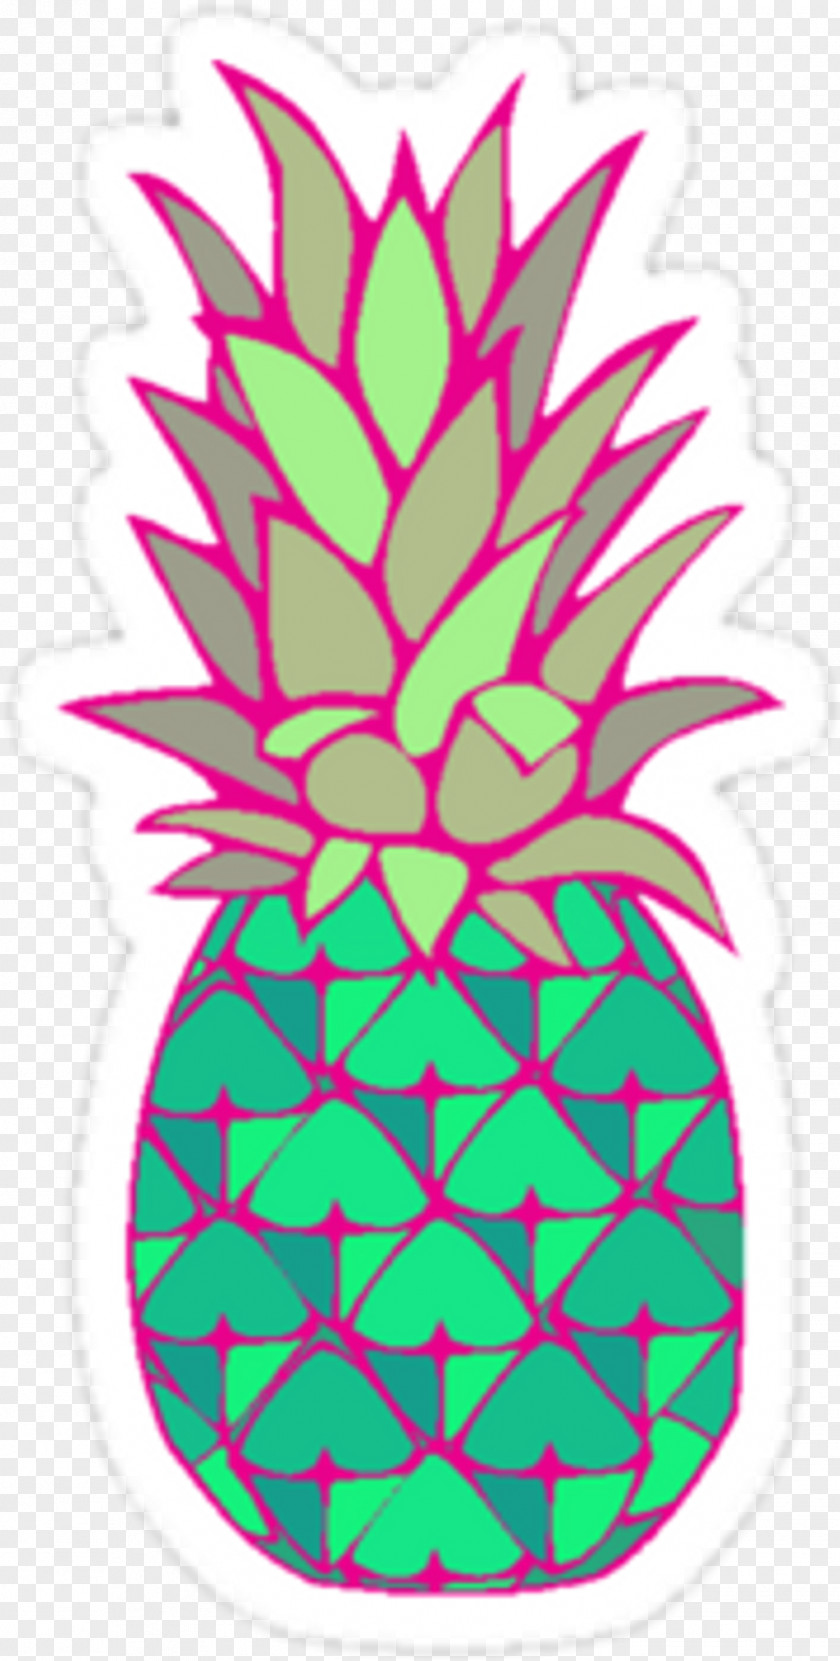 Pineapple Crown Sticker Red Decal Clip Art PNG